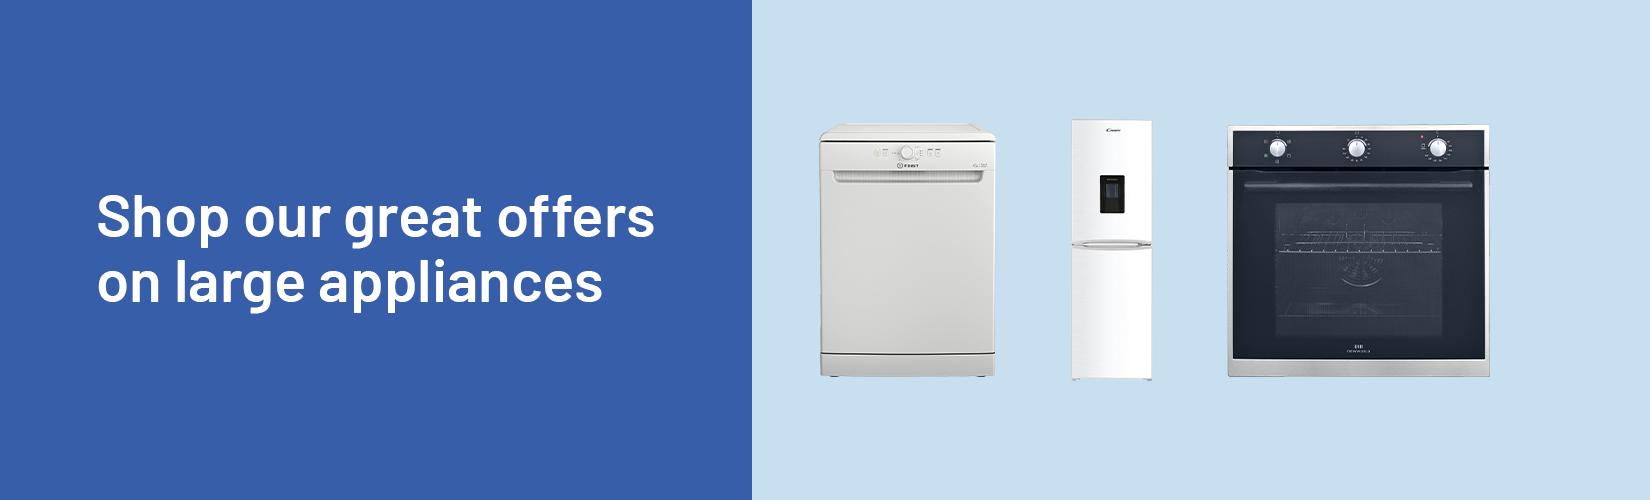 Shop our great offers on large appliances from £59.